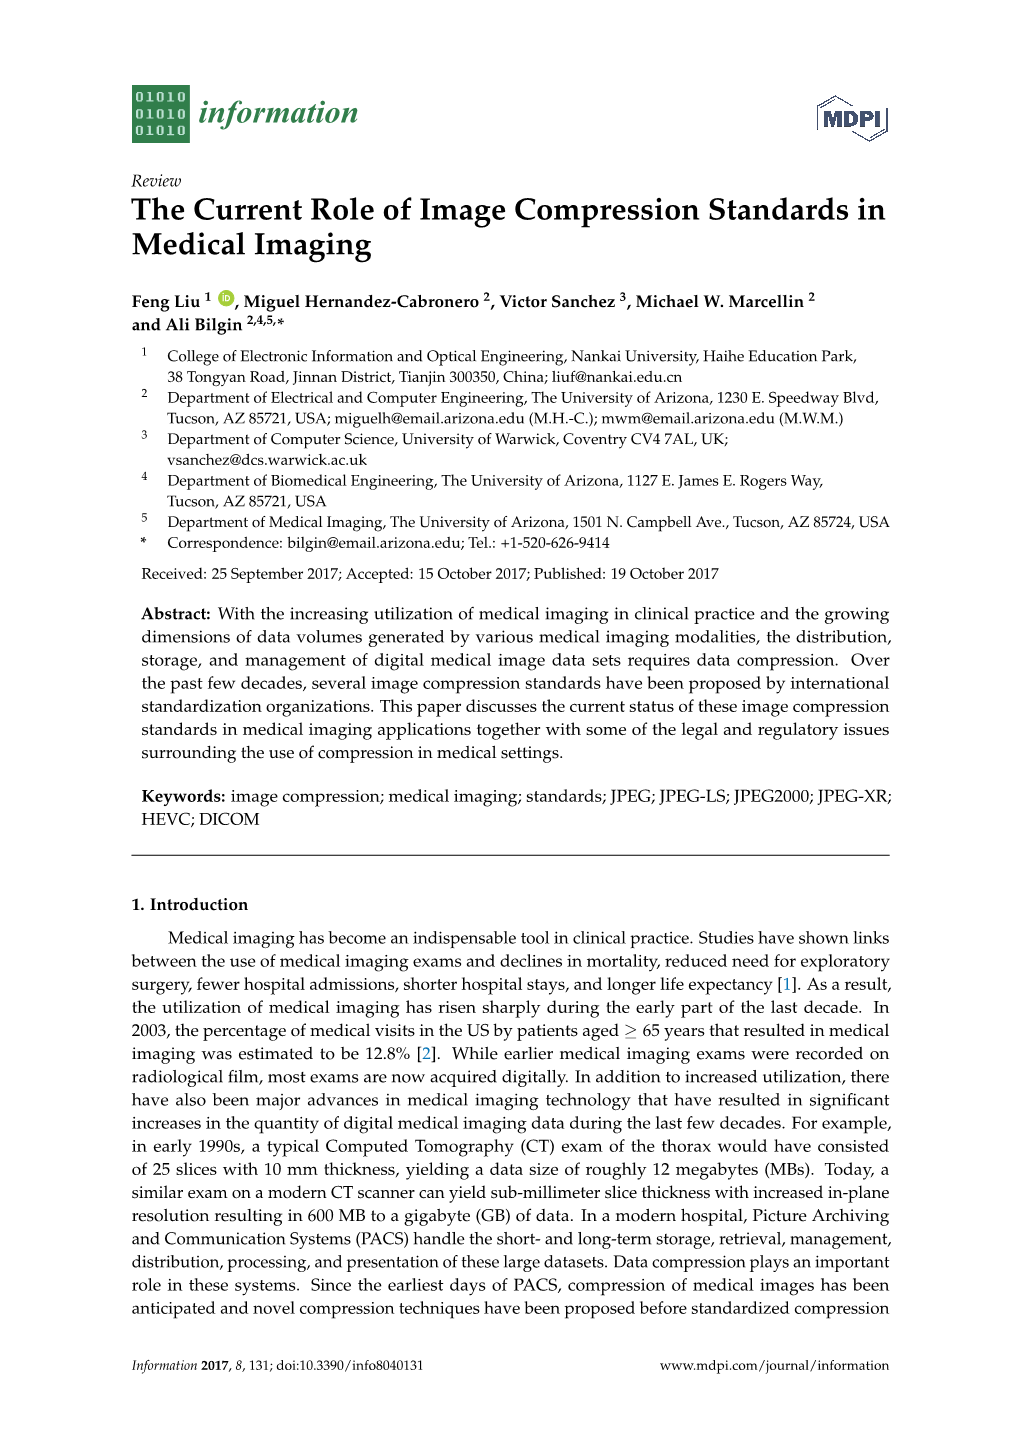 The Current Role of Image Compression Standards in Medical Imaging